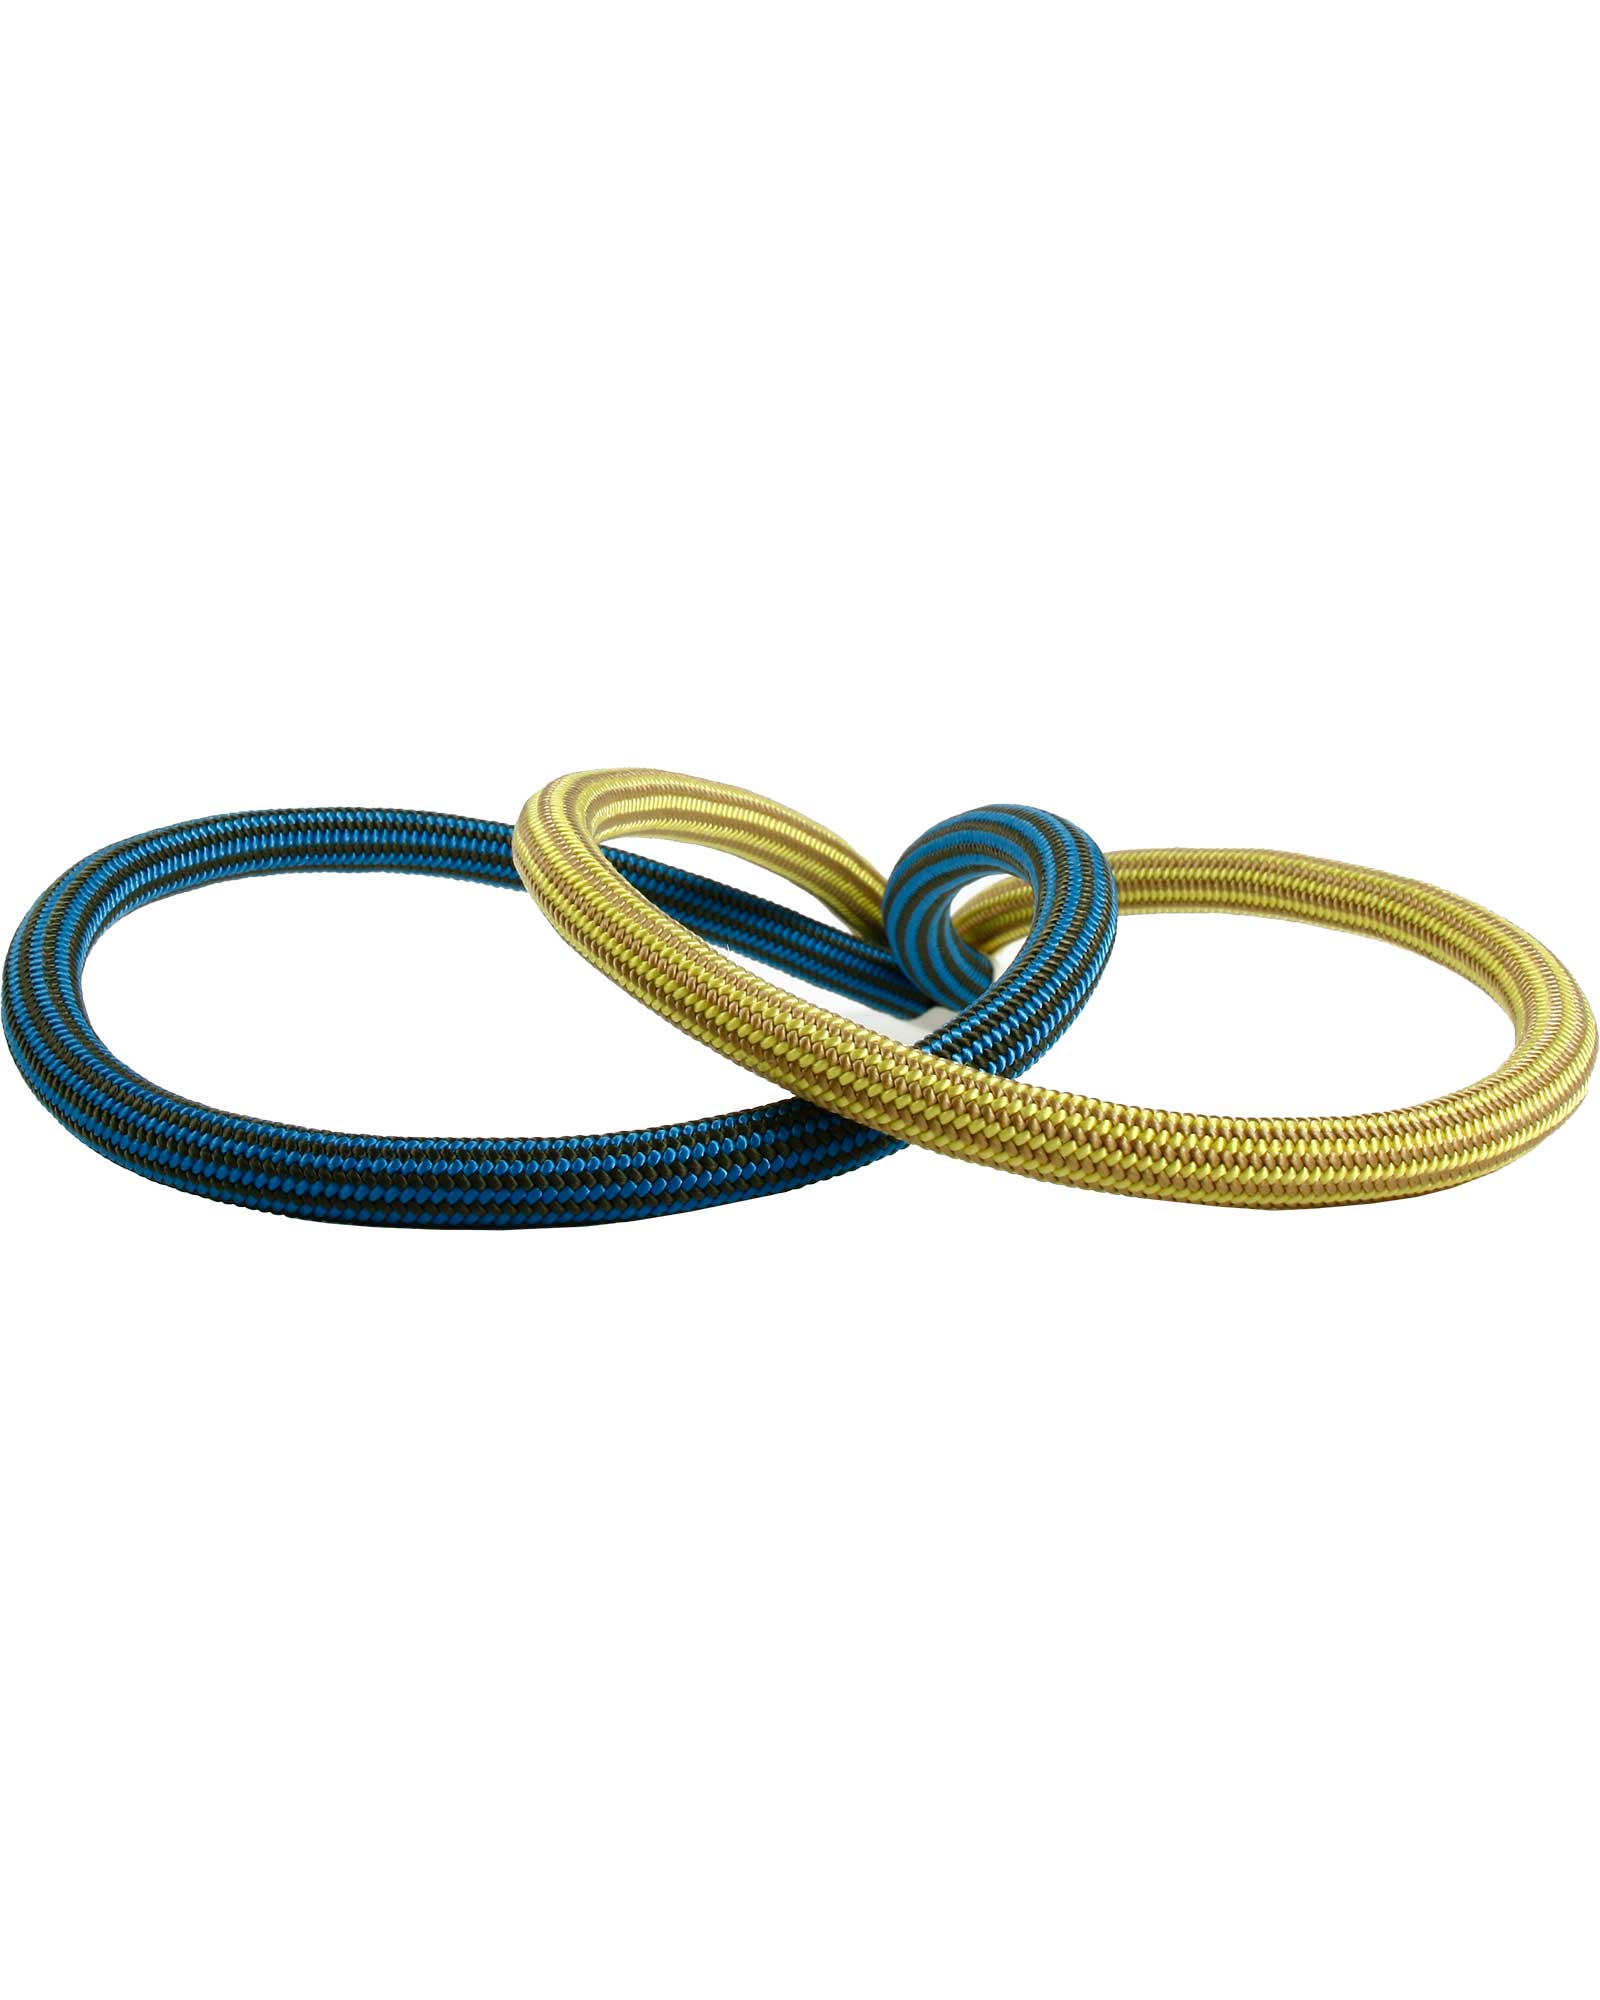 Edelweiss Lithium 8.5mm x 50m Rope - Yellow 50m